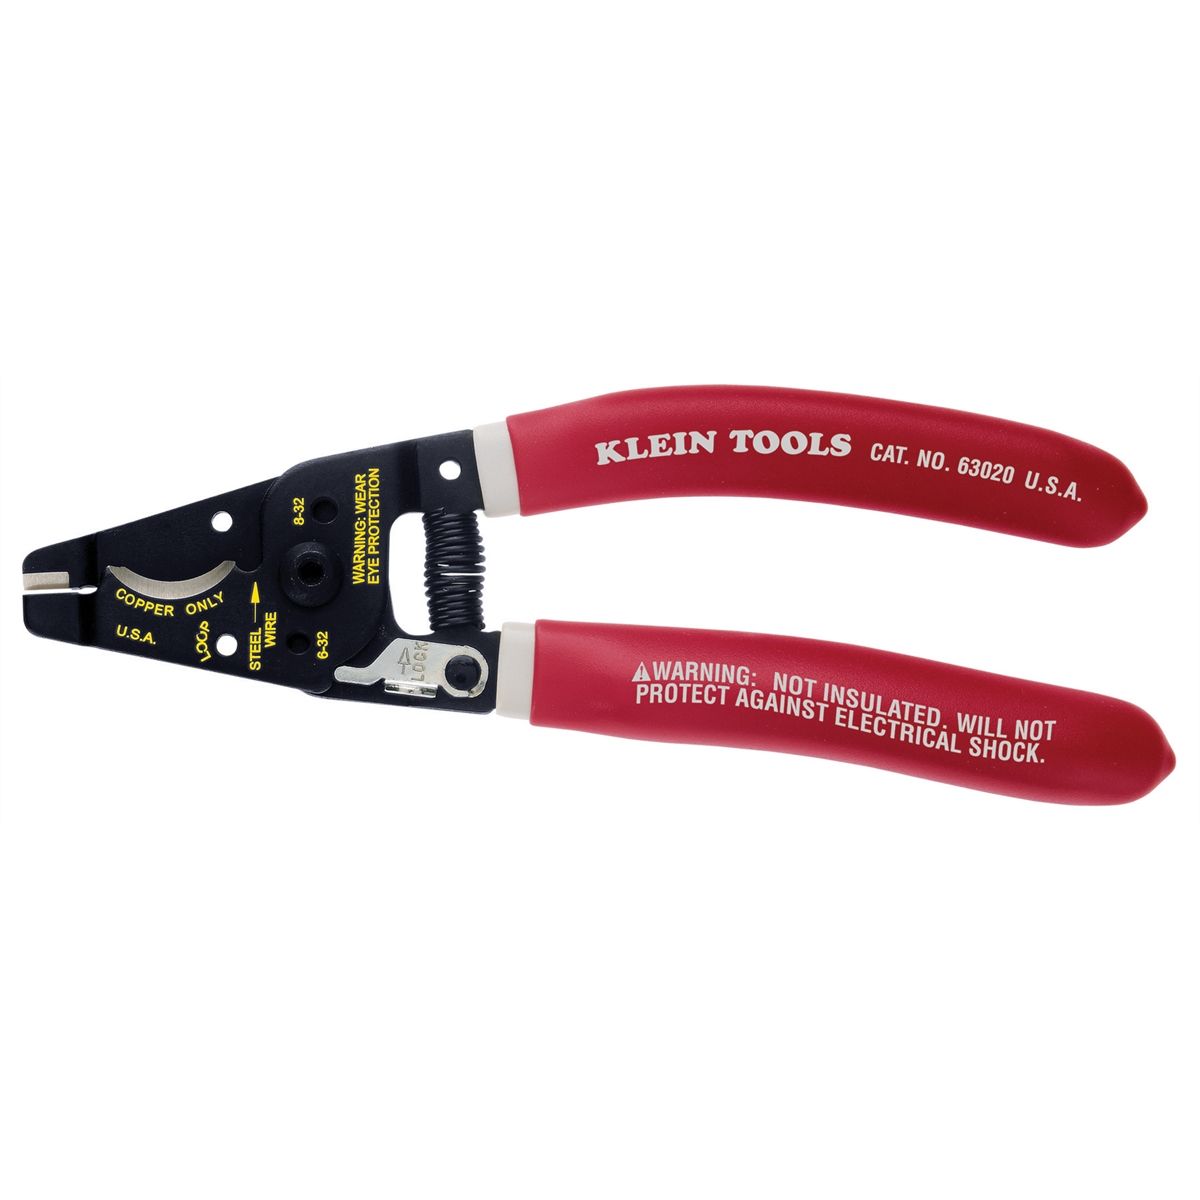 Klein-Kurver Multi-Cable Cutter